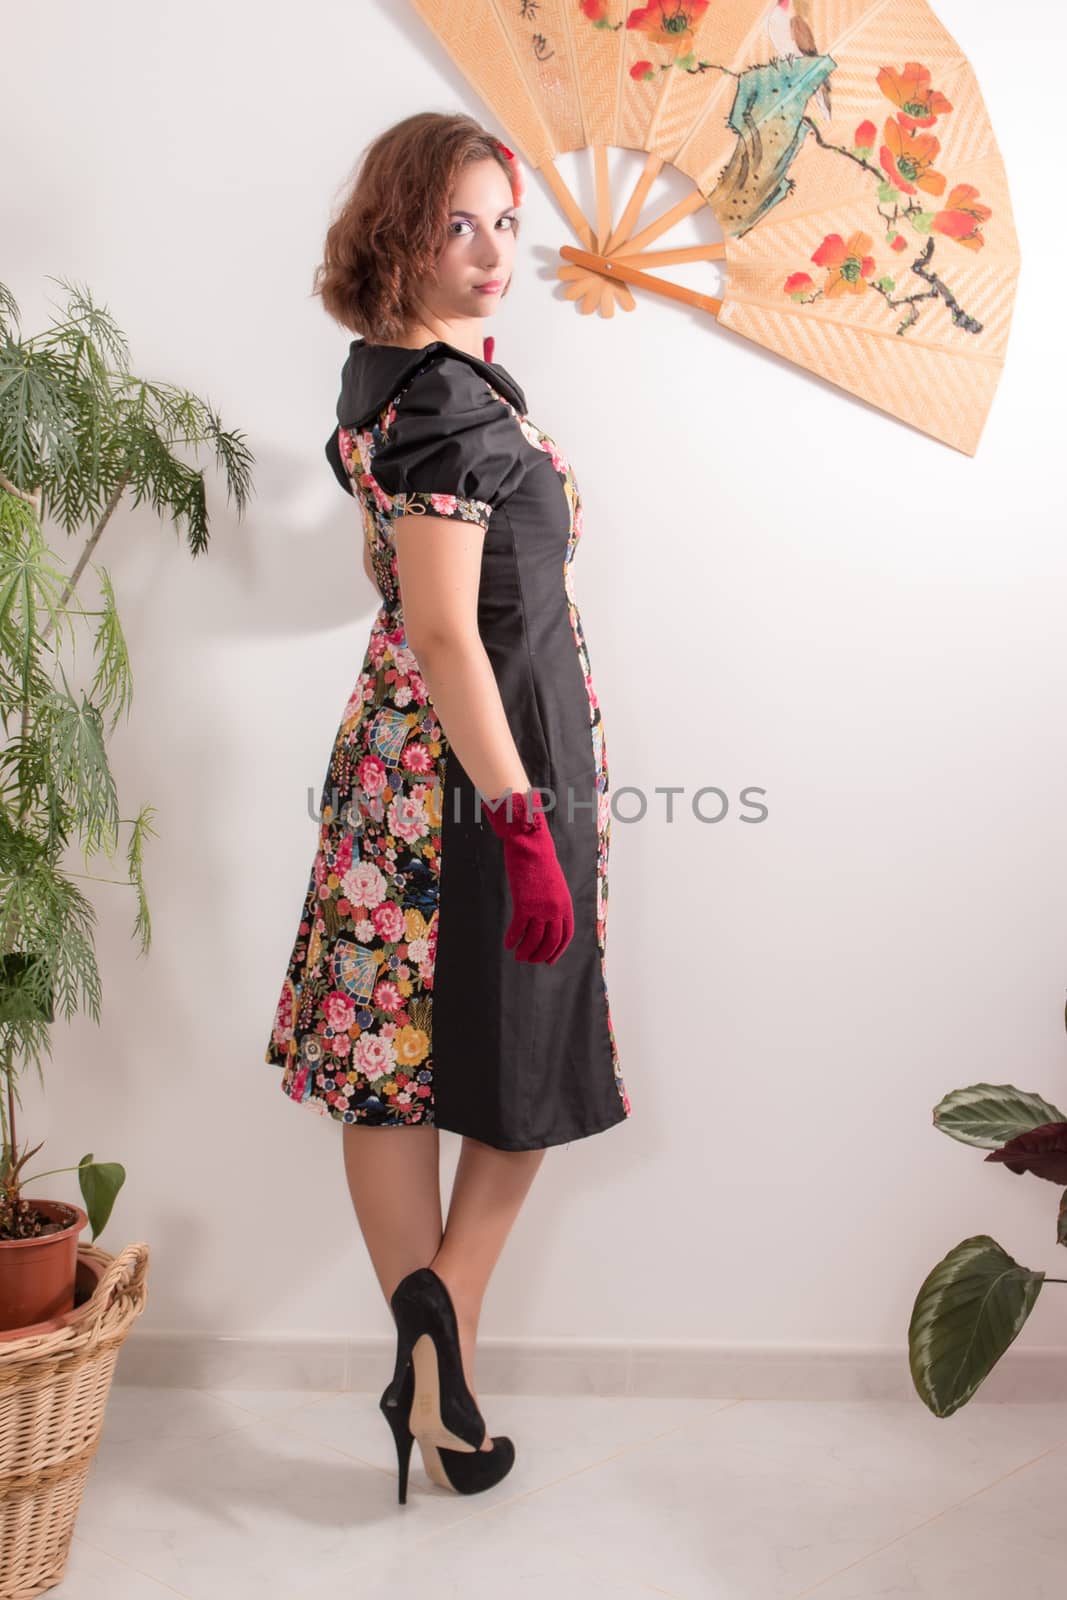 young girl with a japanese style dress in her home by membio